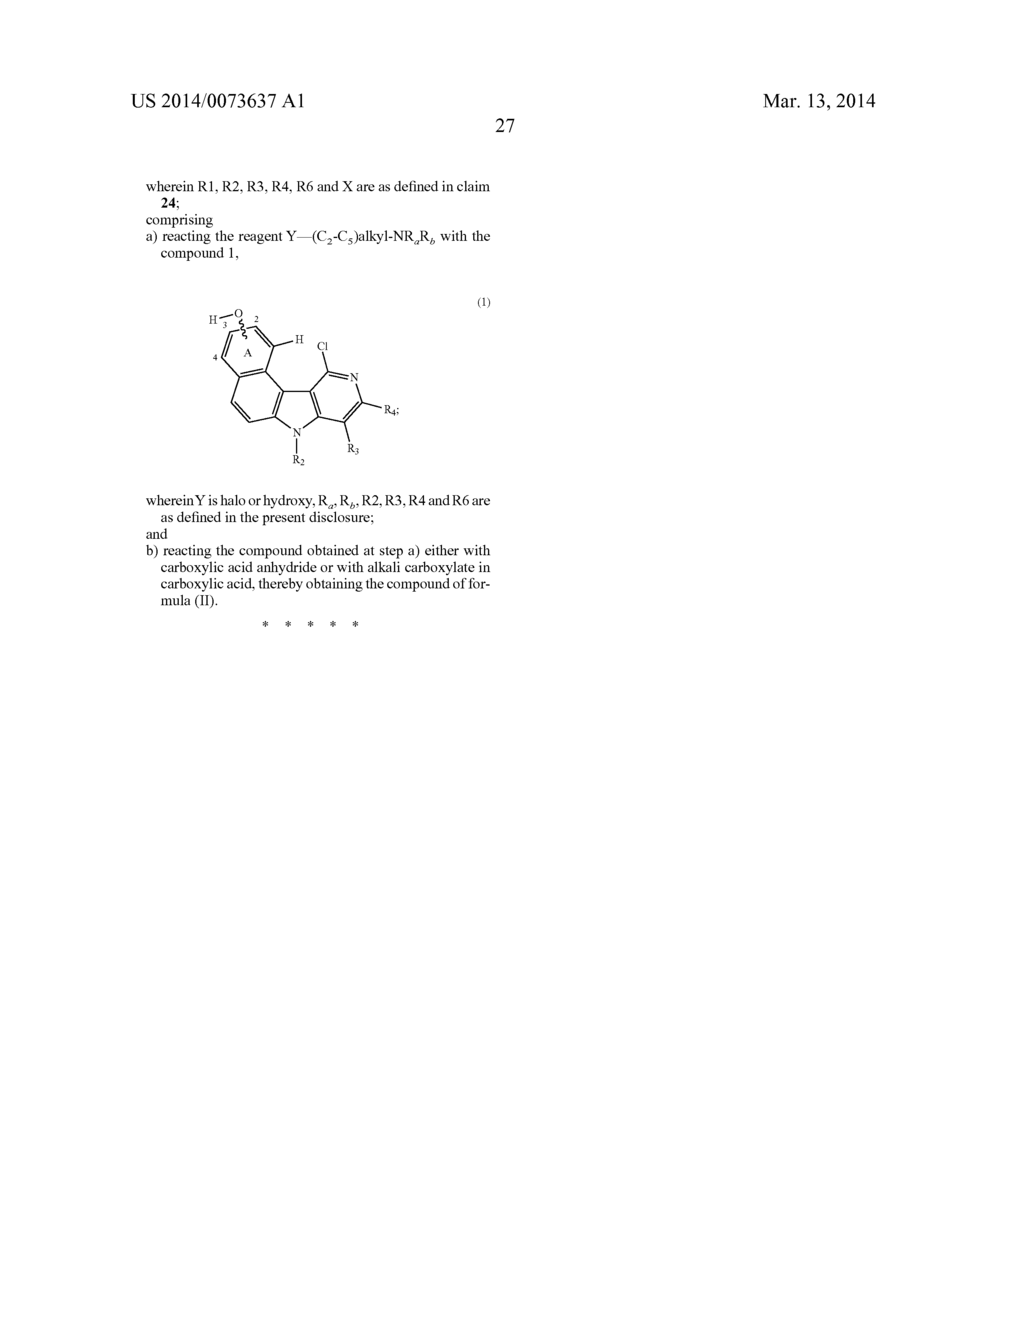 AMINO-SUBSTITUTED-ALKYLOXY-BENZO[E]PYRIDO[4,3-B]INDOLE DERIVATIVES AS NEW     POTENT KINASE INHIBITORS - diagram, schematic, and image 38